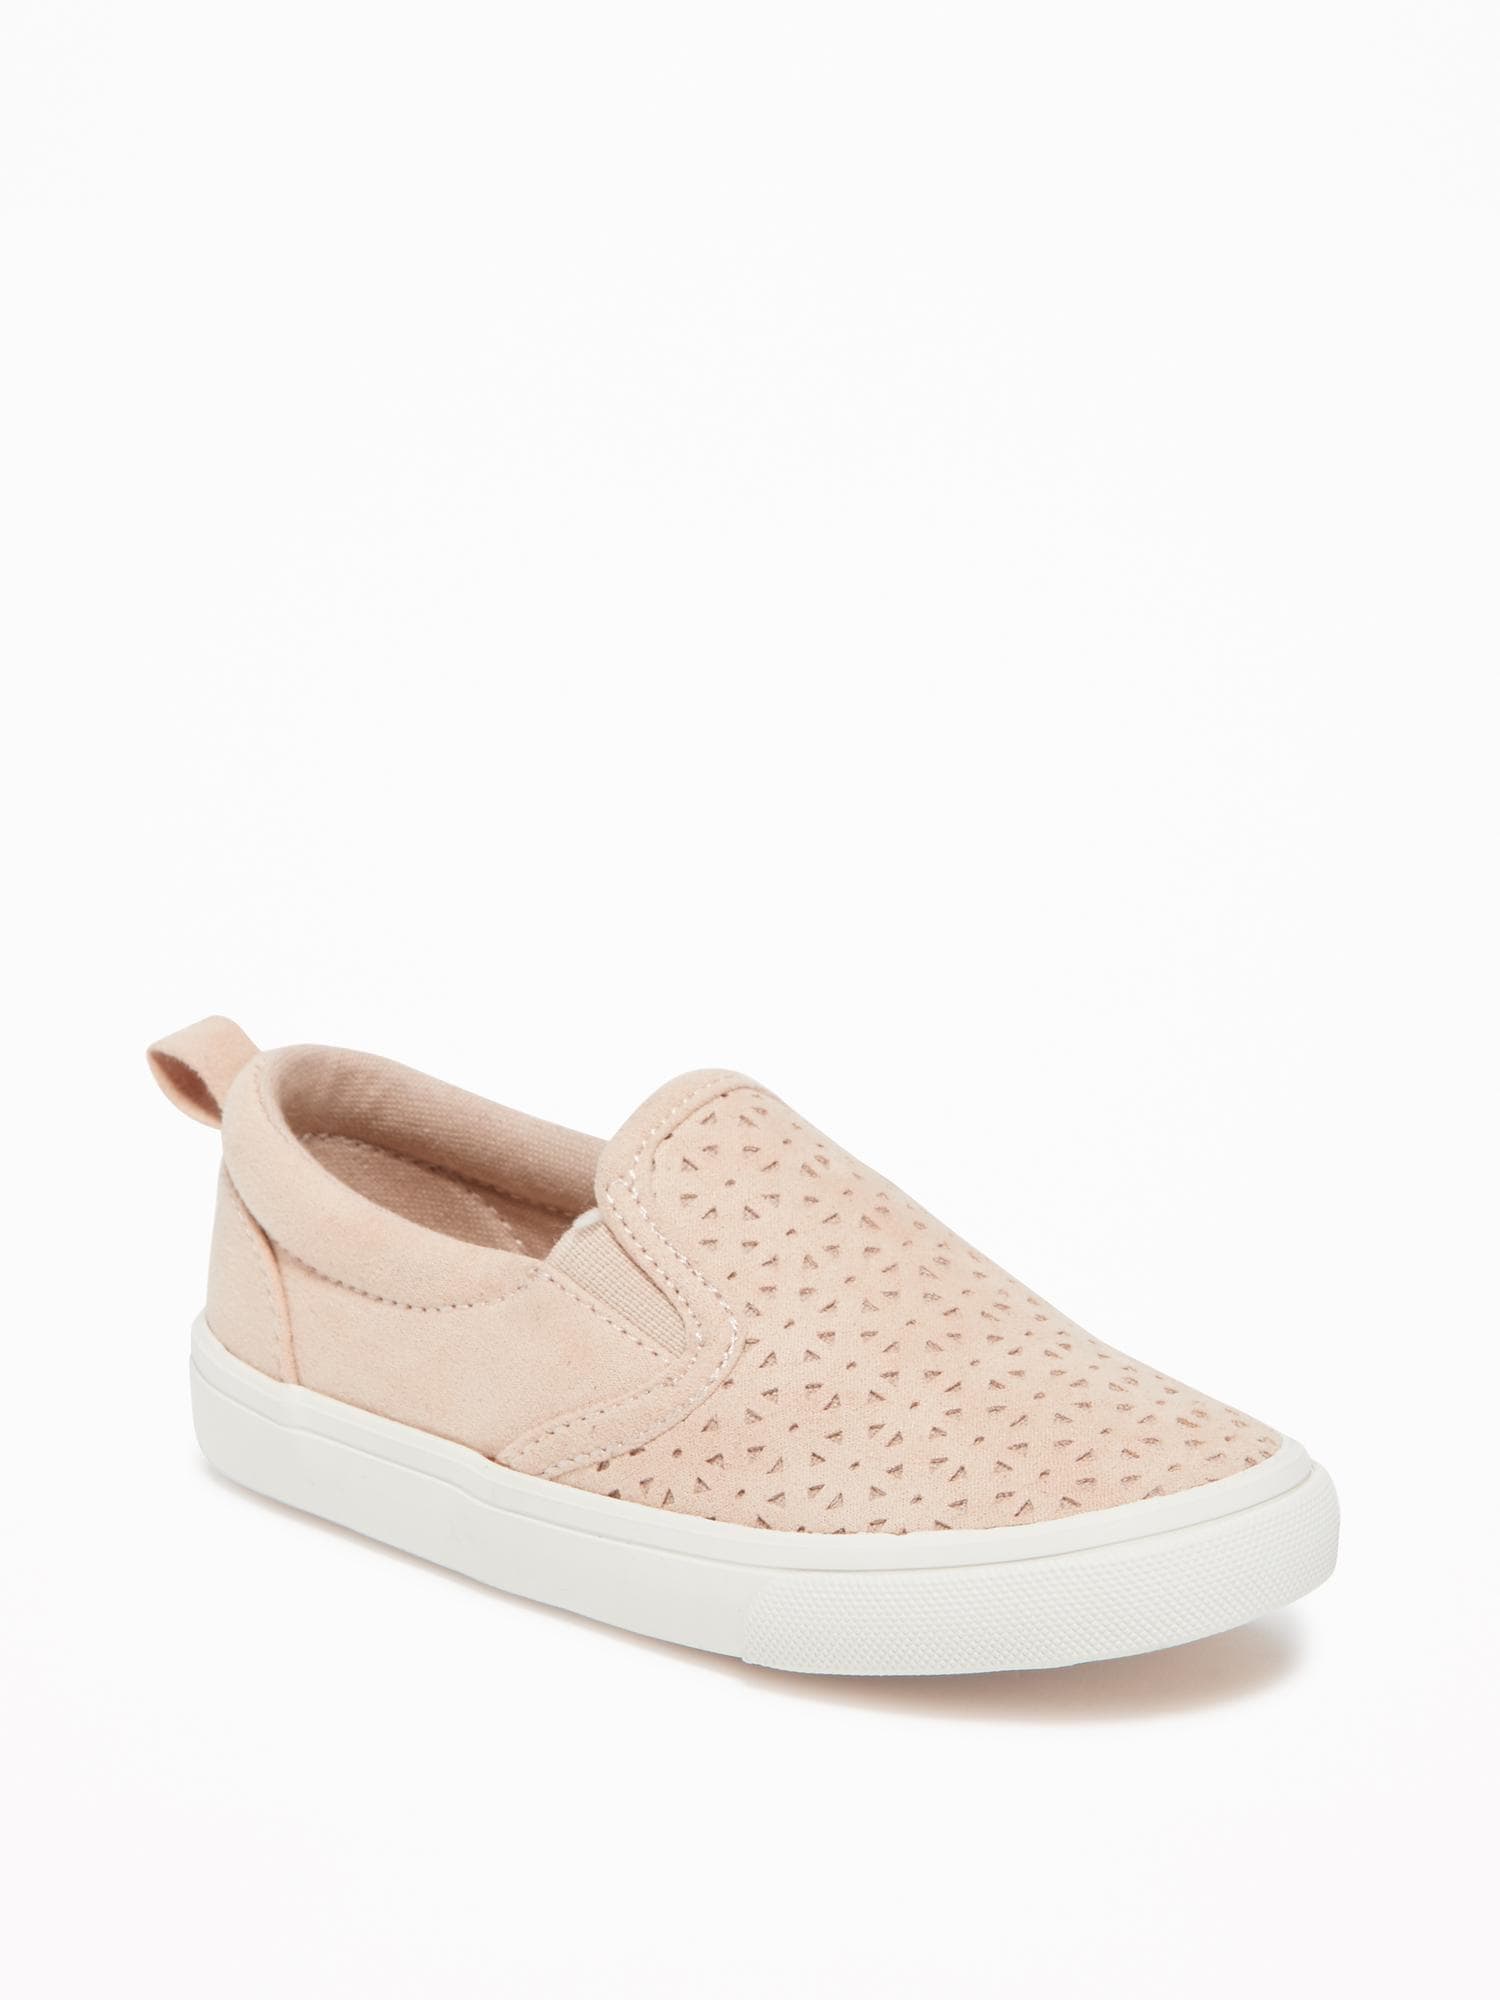 Perforated Slip-Ons for Toddler Girls | Old Navy